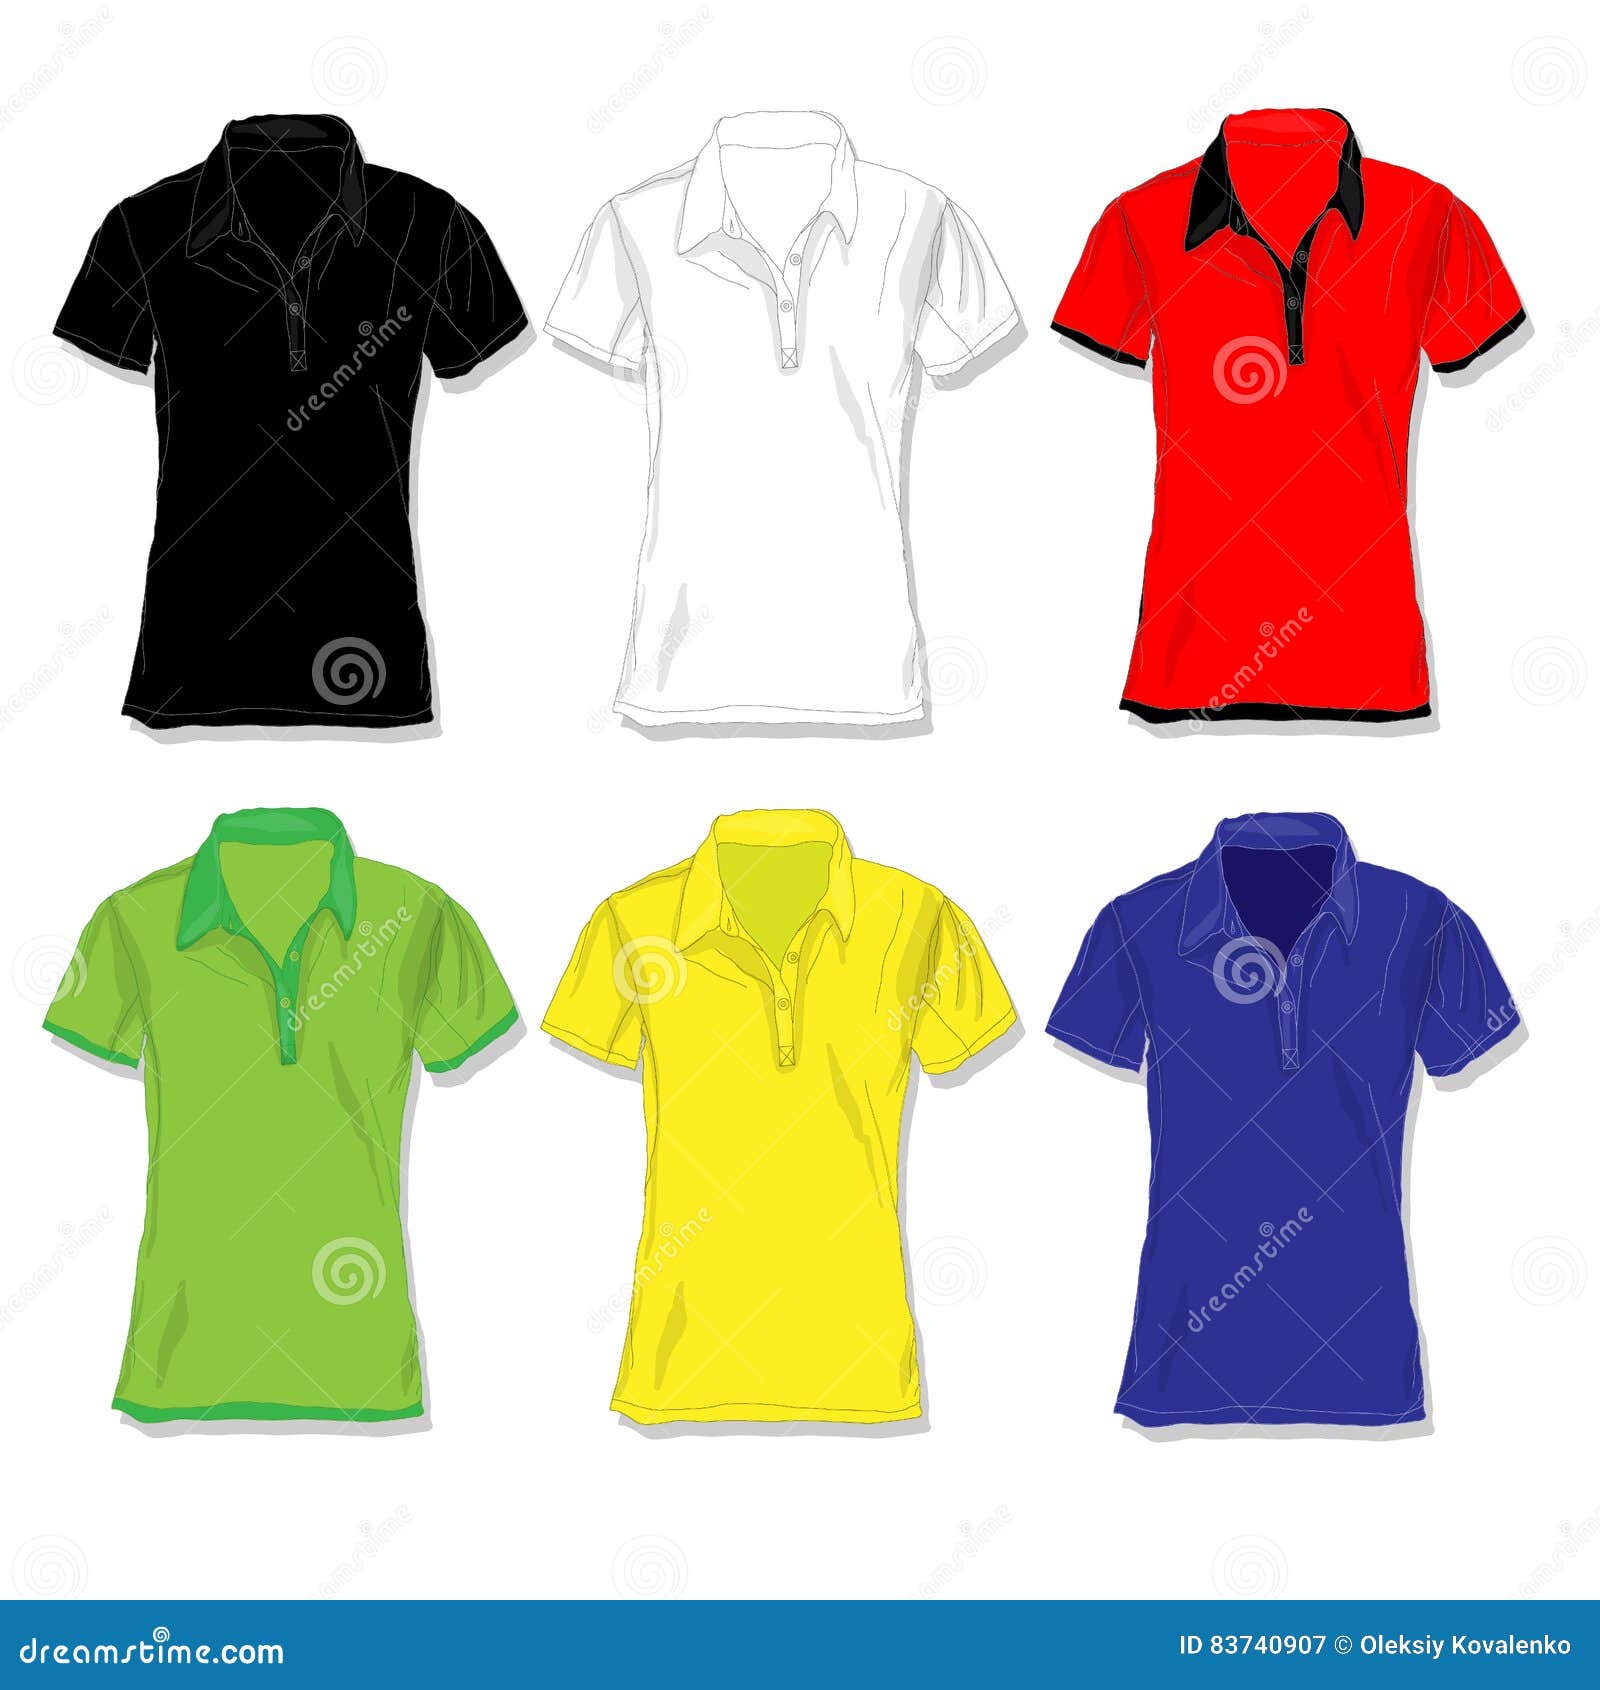 Male Shirt Illustration. Clothes Collection Stock Vector - Illustration of apparel, clothes ...